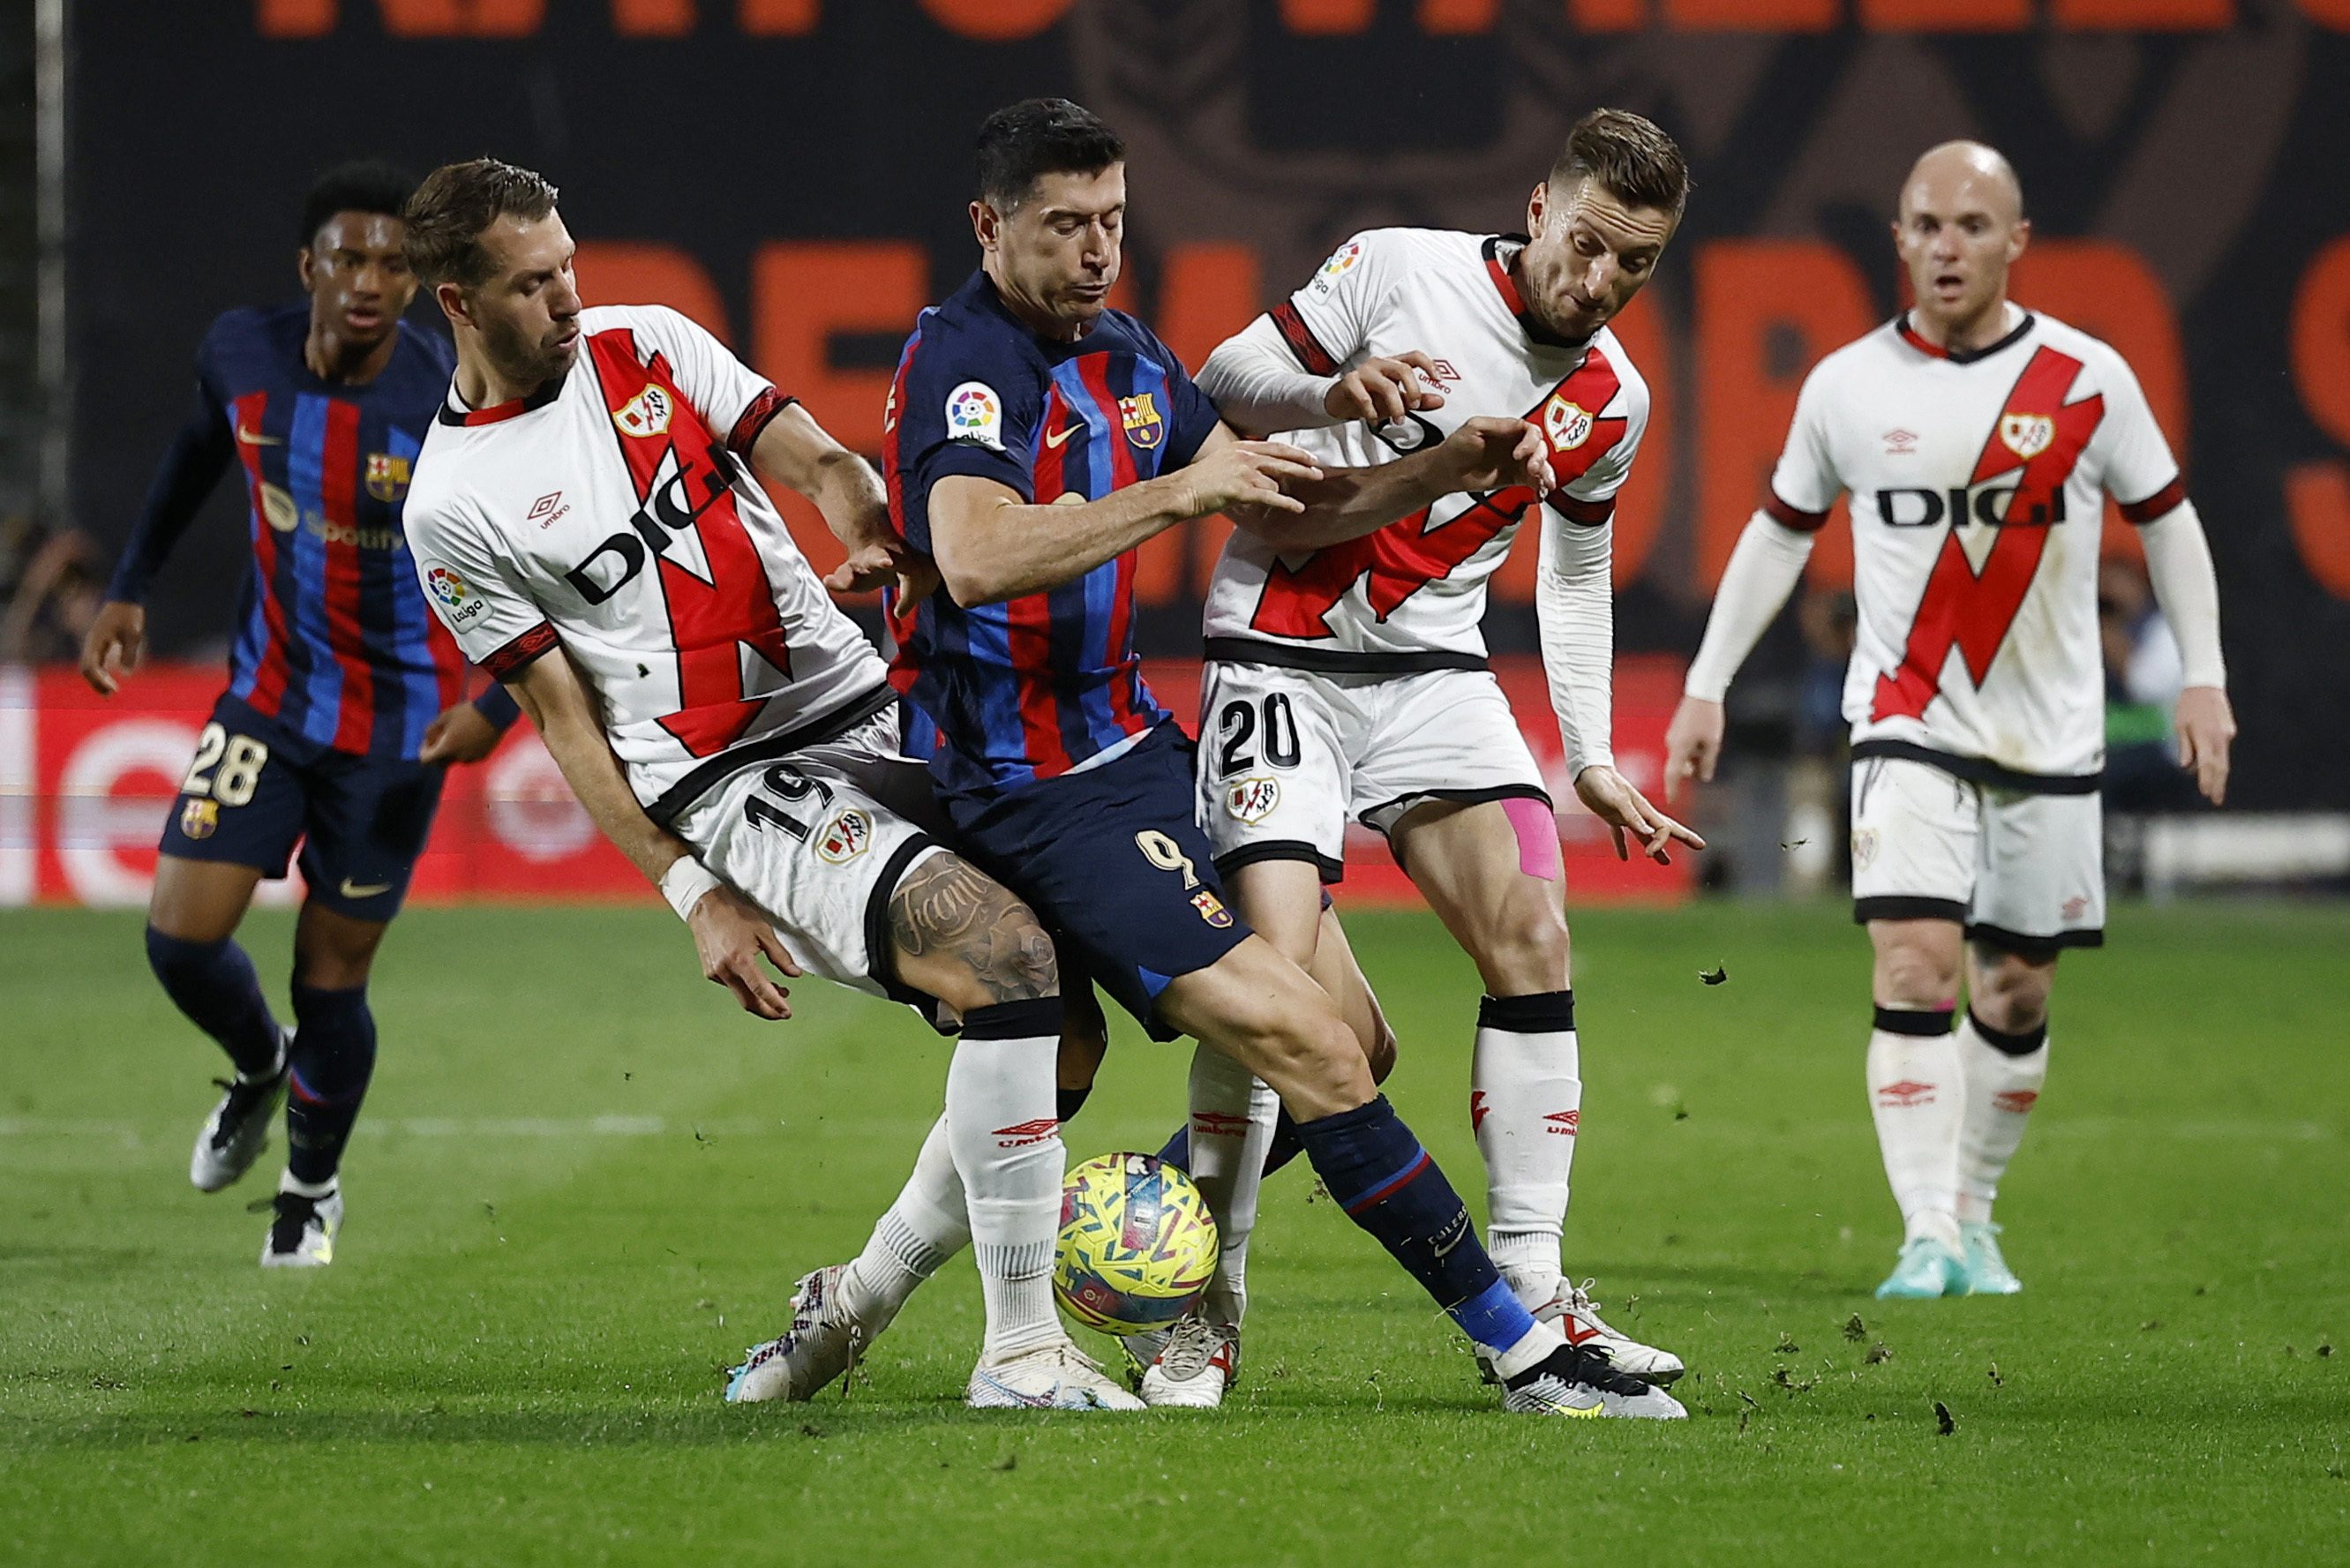 Barcelona stunned by Rayo Vallecano in surprise 2-1 defeat